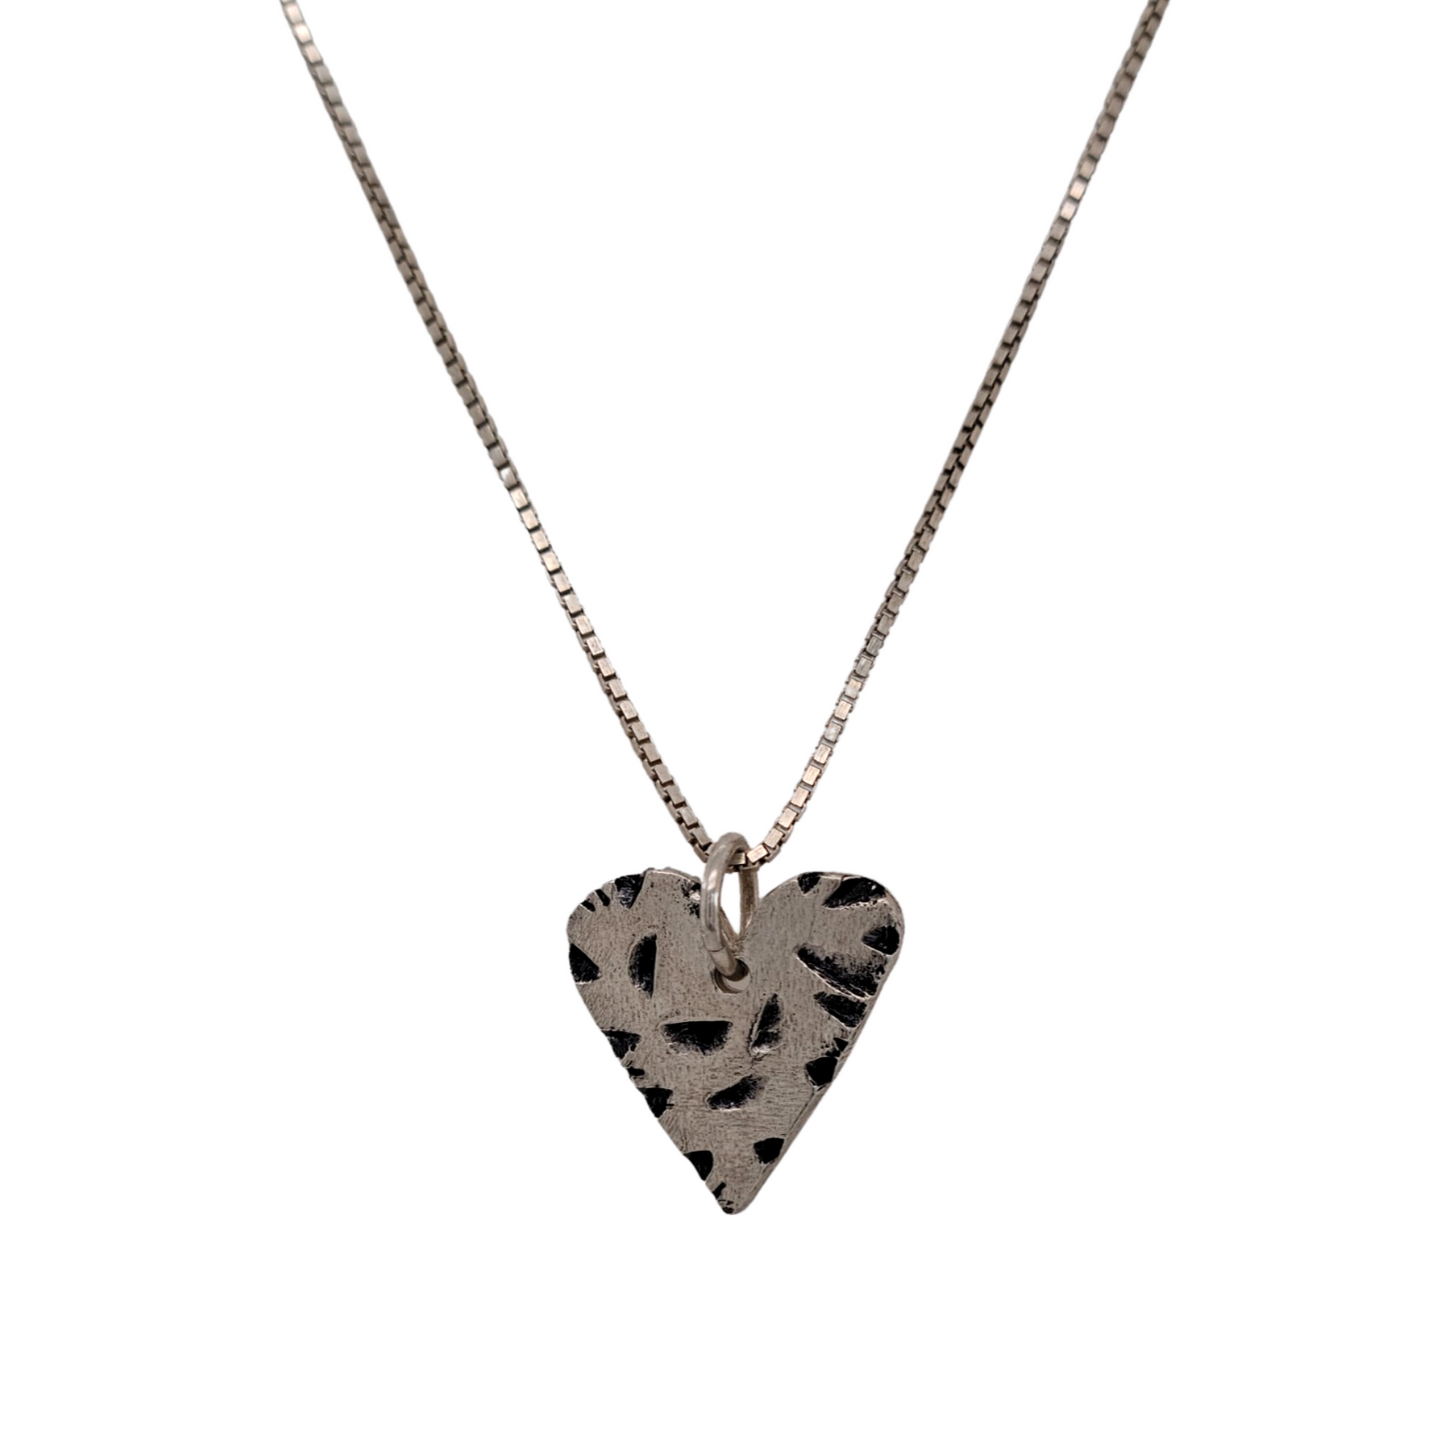 Small Silver Heart Necklace